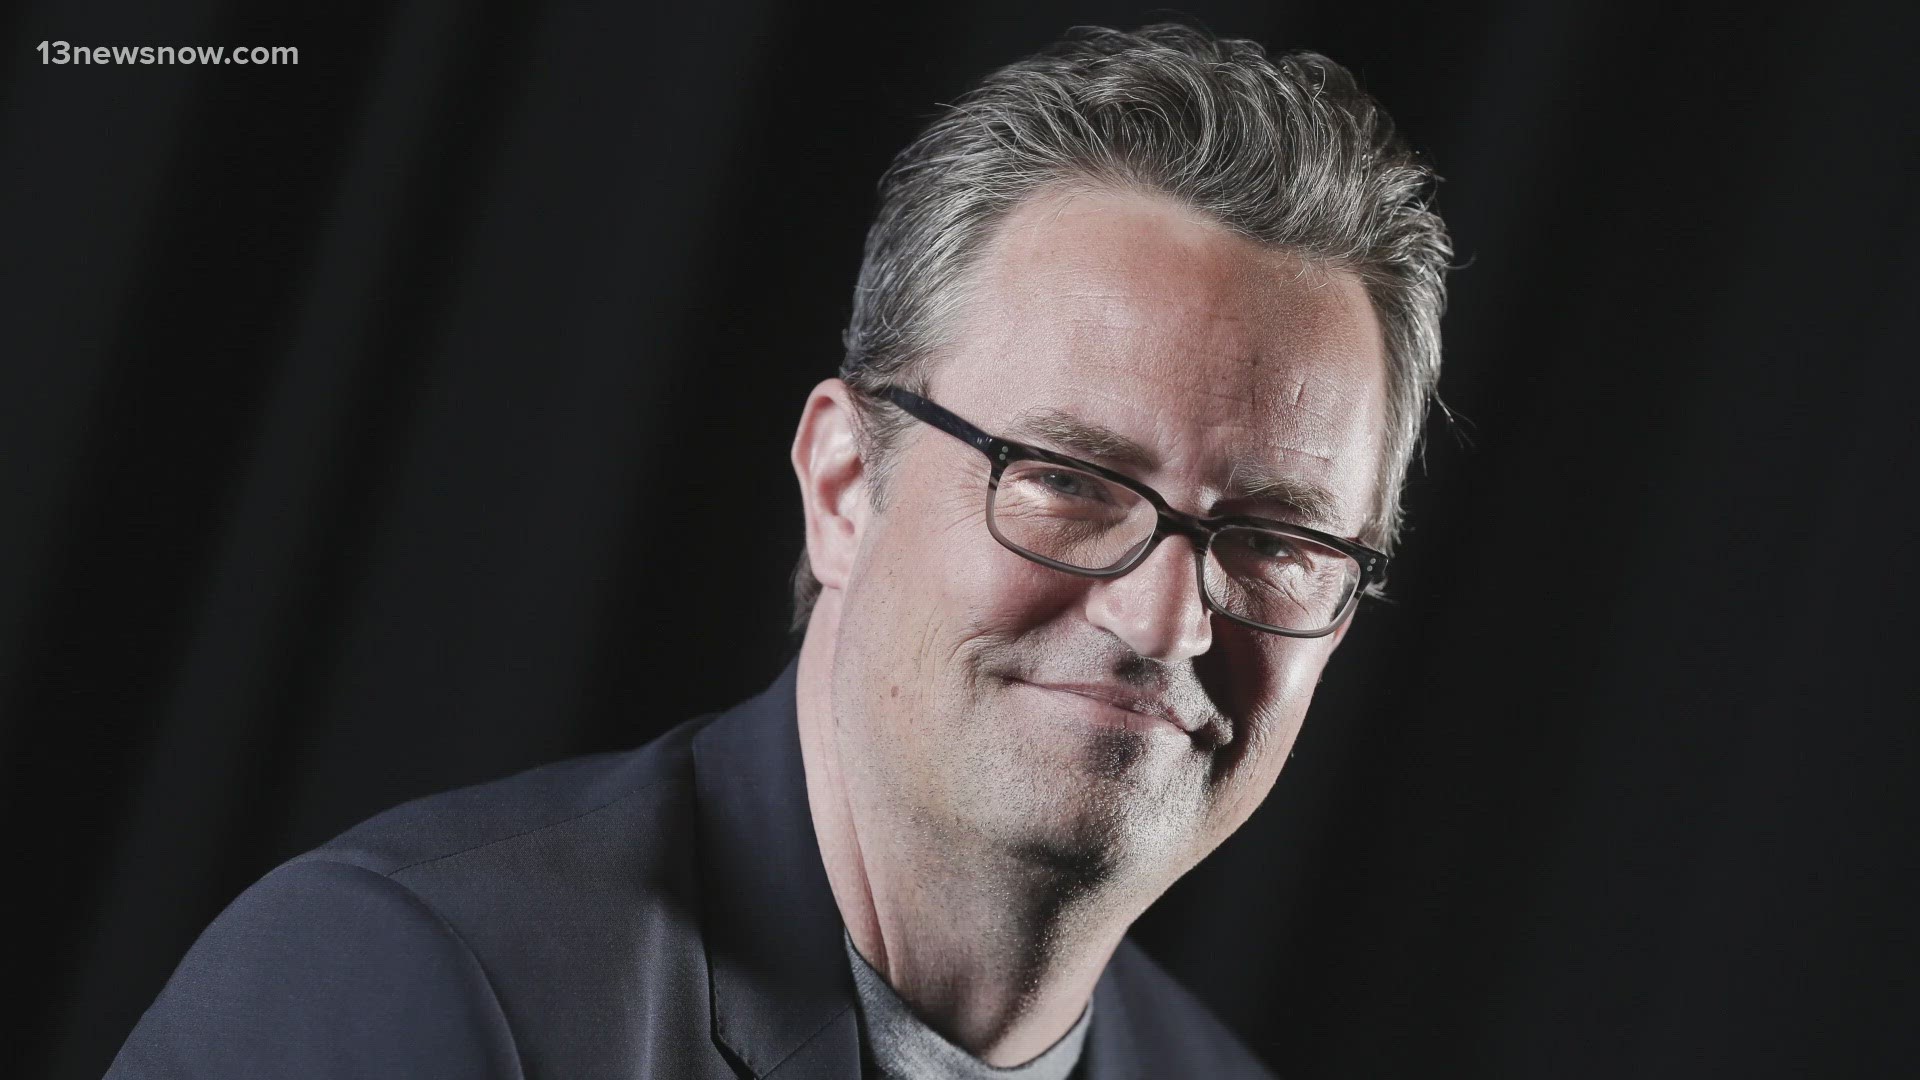 Sources told TMZ and the L.A. Times that there were no signs of foul play in actor Matthew Perry's death.